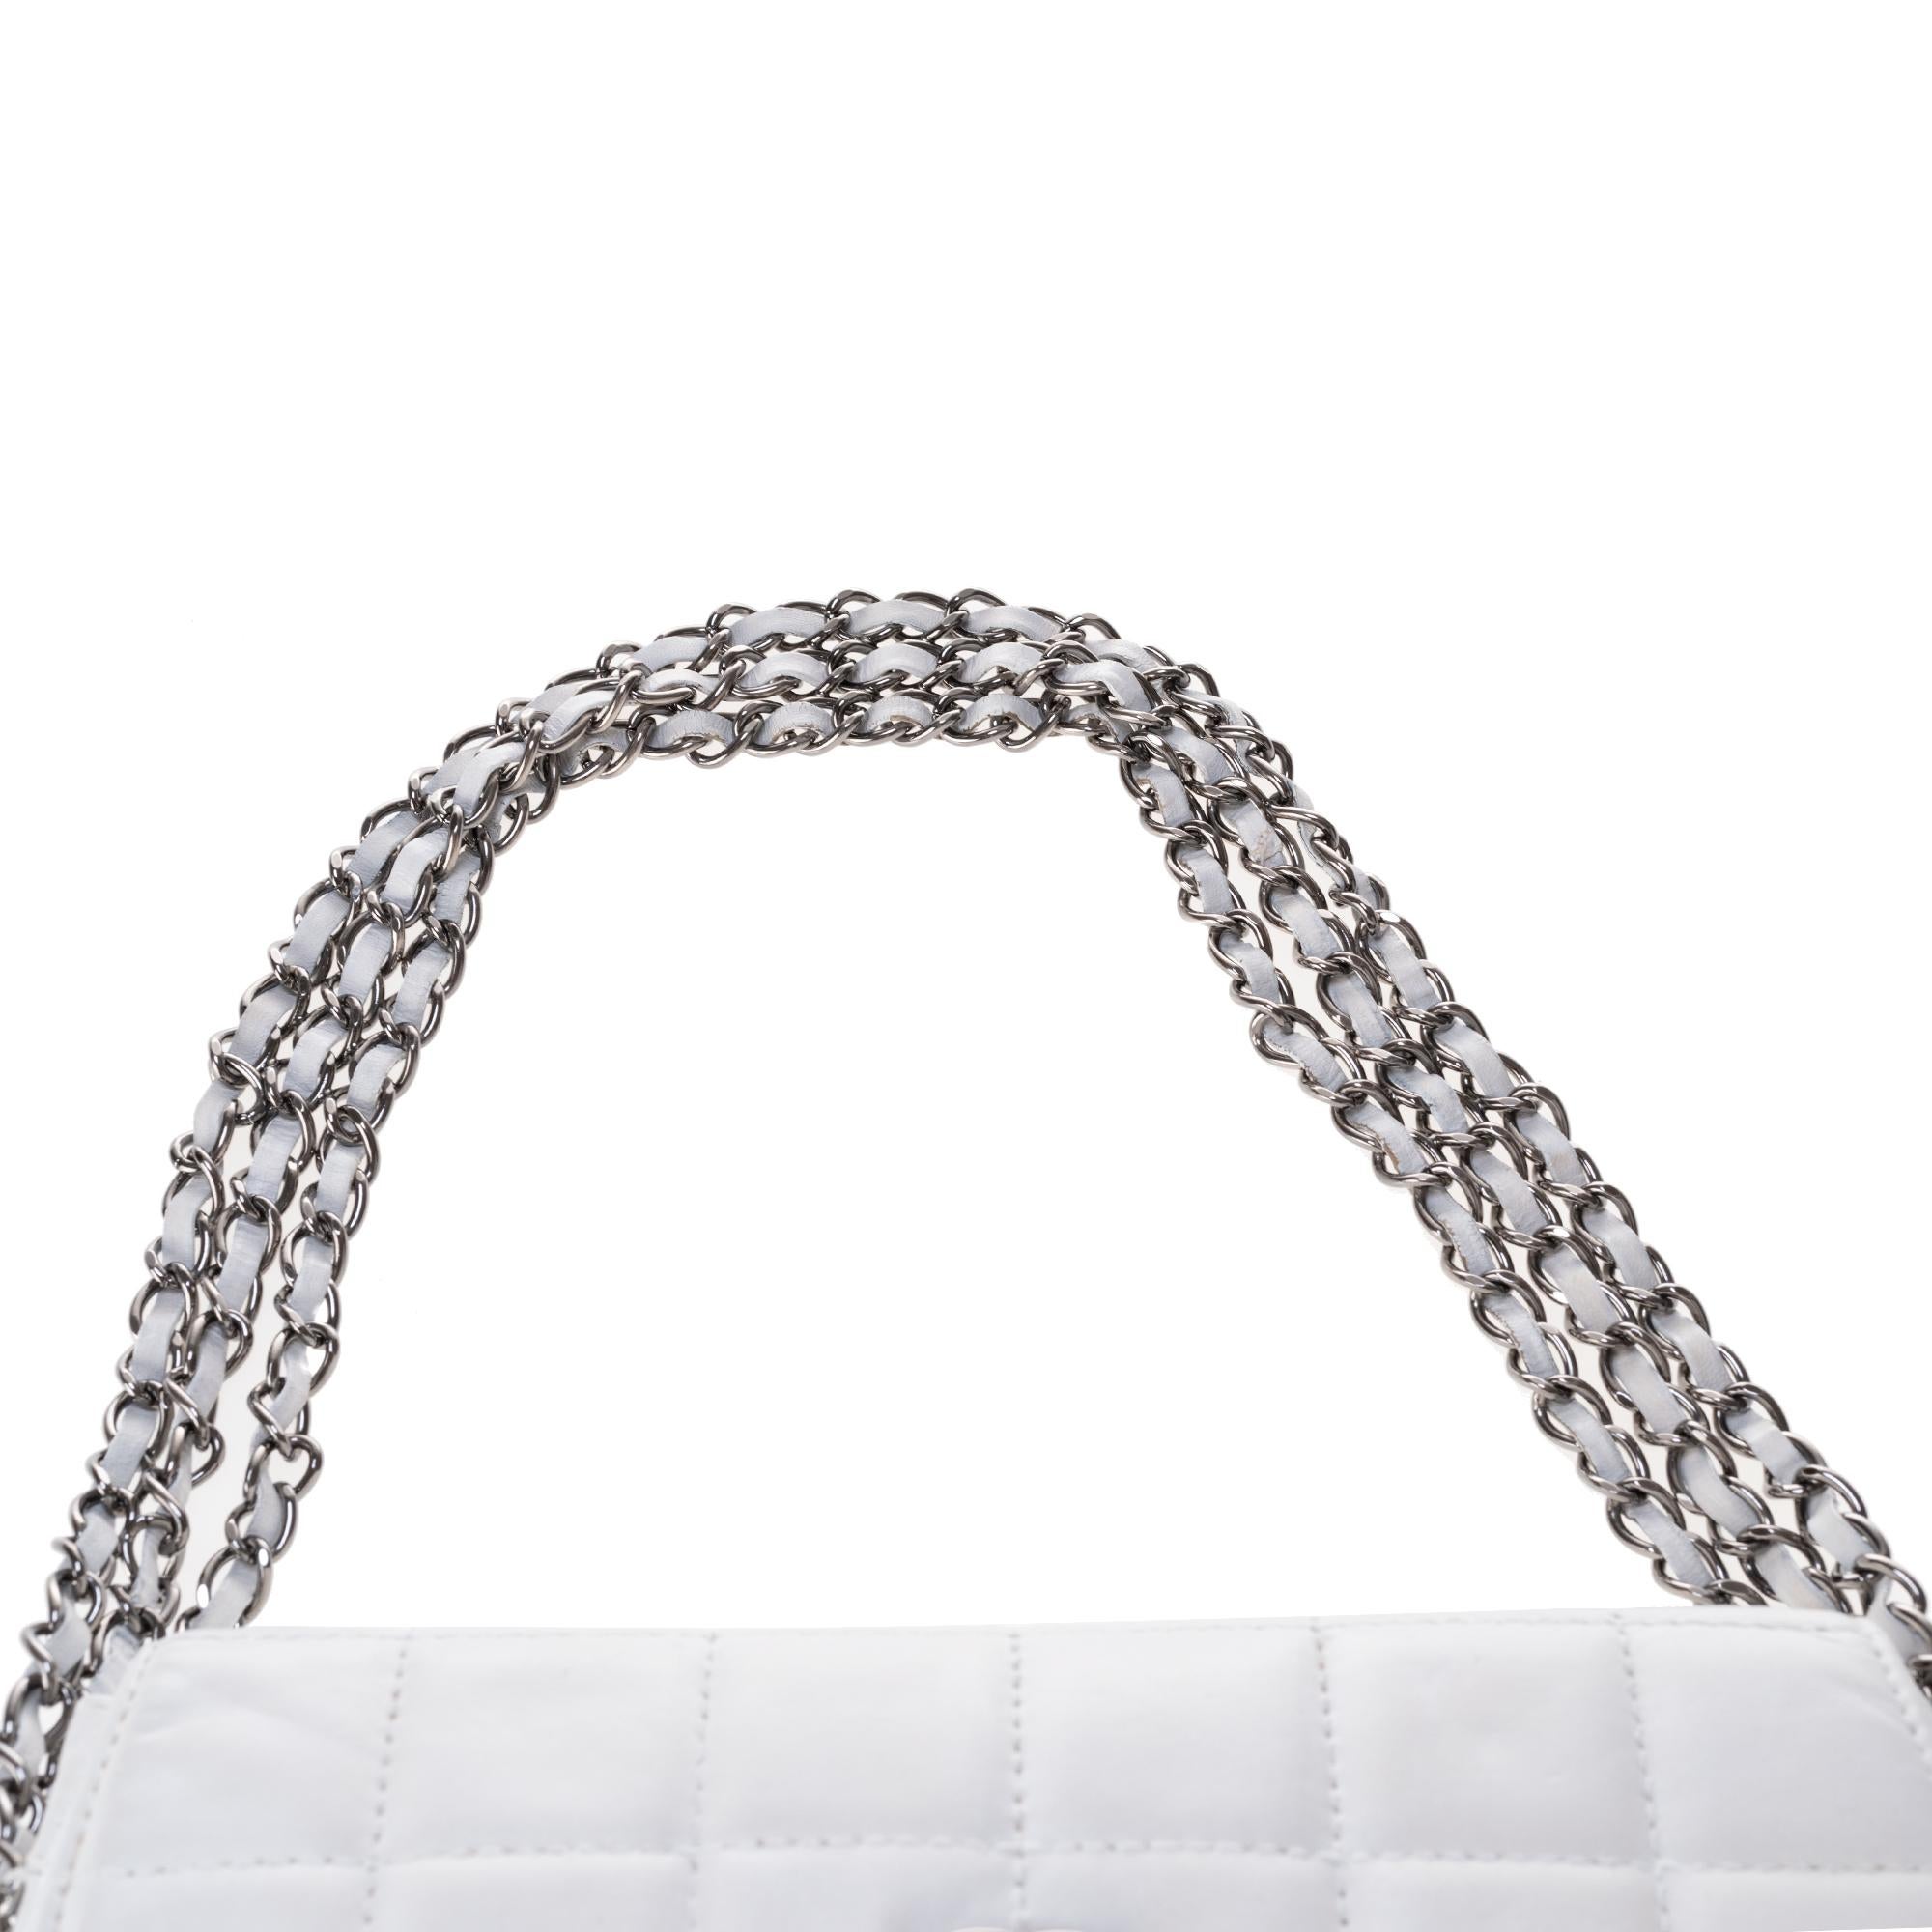 Stunning Chanel Handbag in white quilted lambskin & triple silver chain ! 2